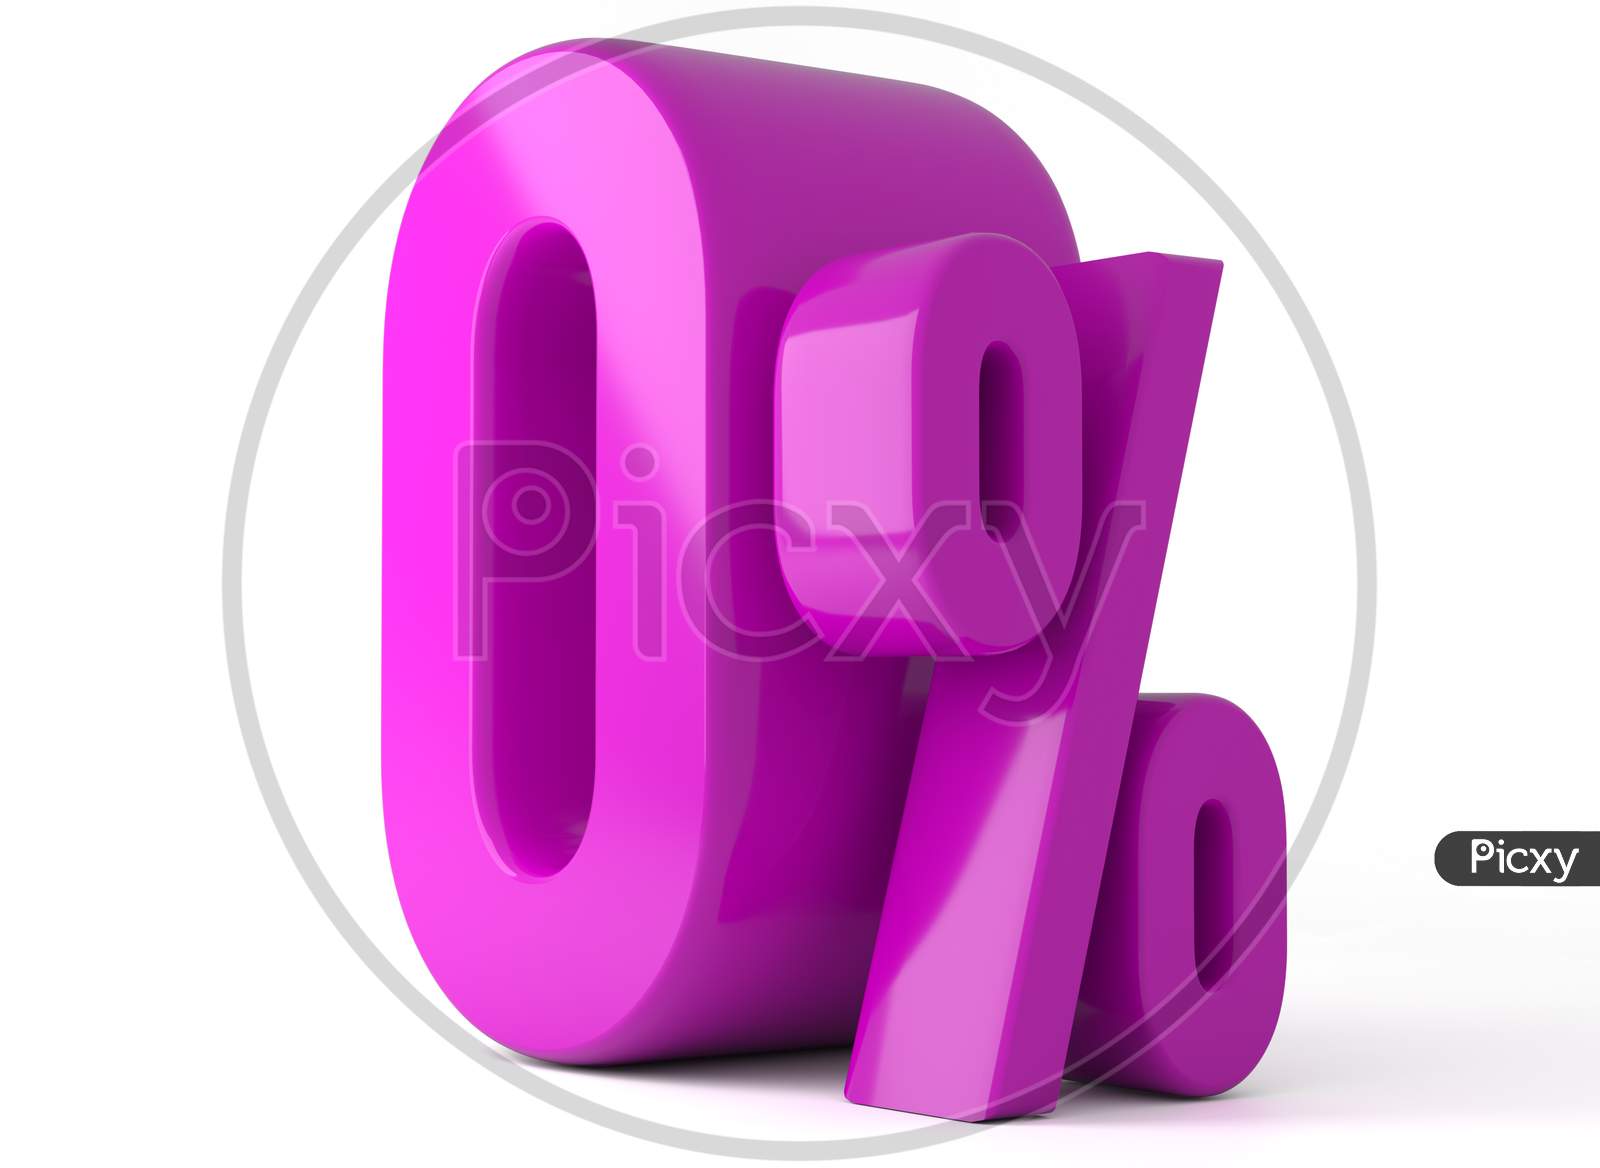 0% 3d illustration. Pink zero percent special Offer on white background